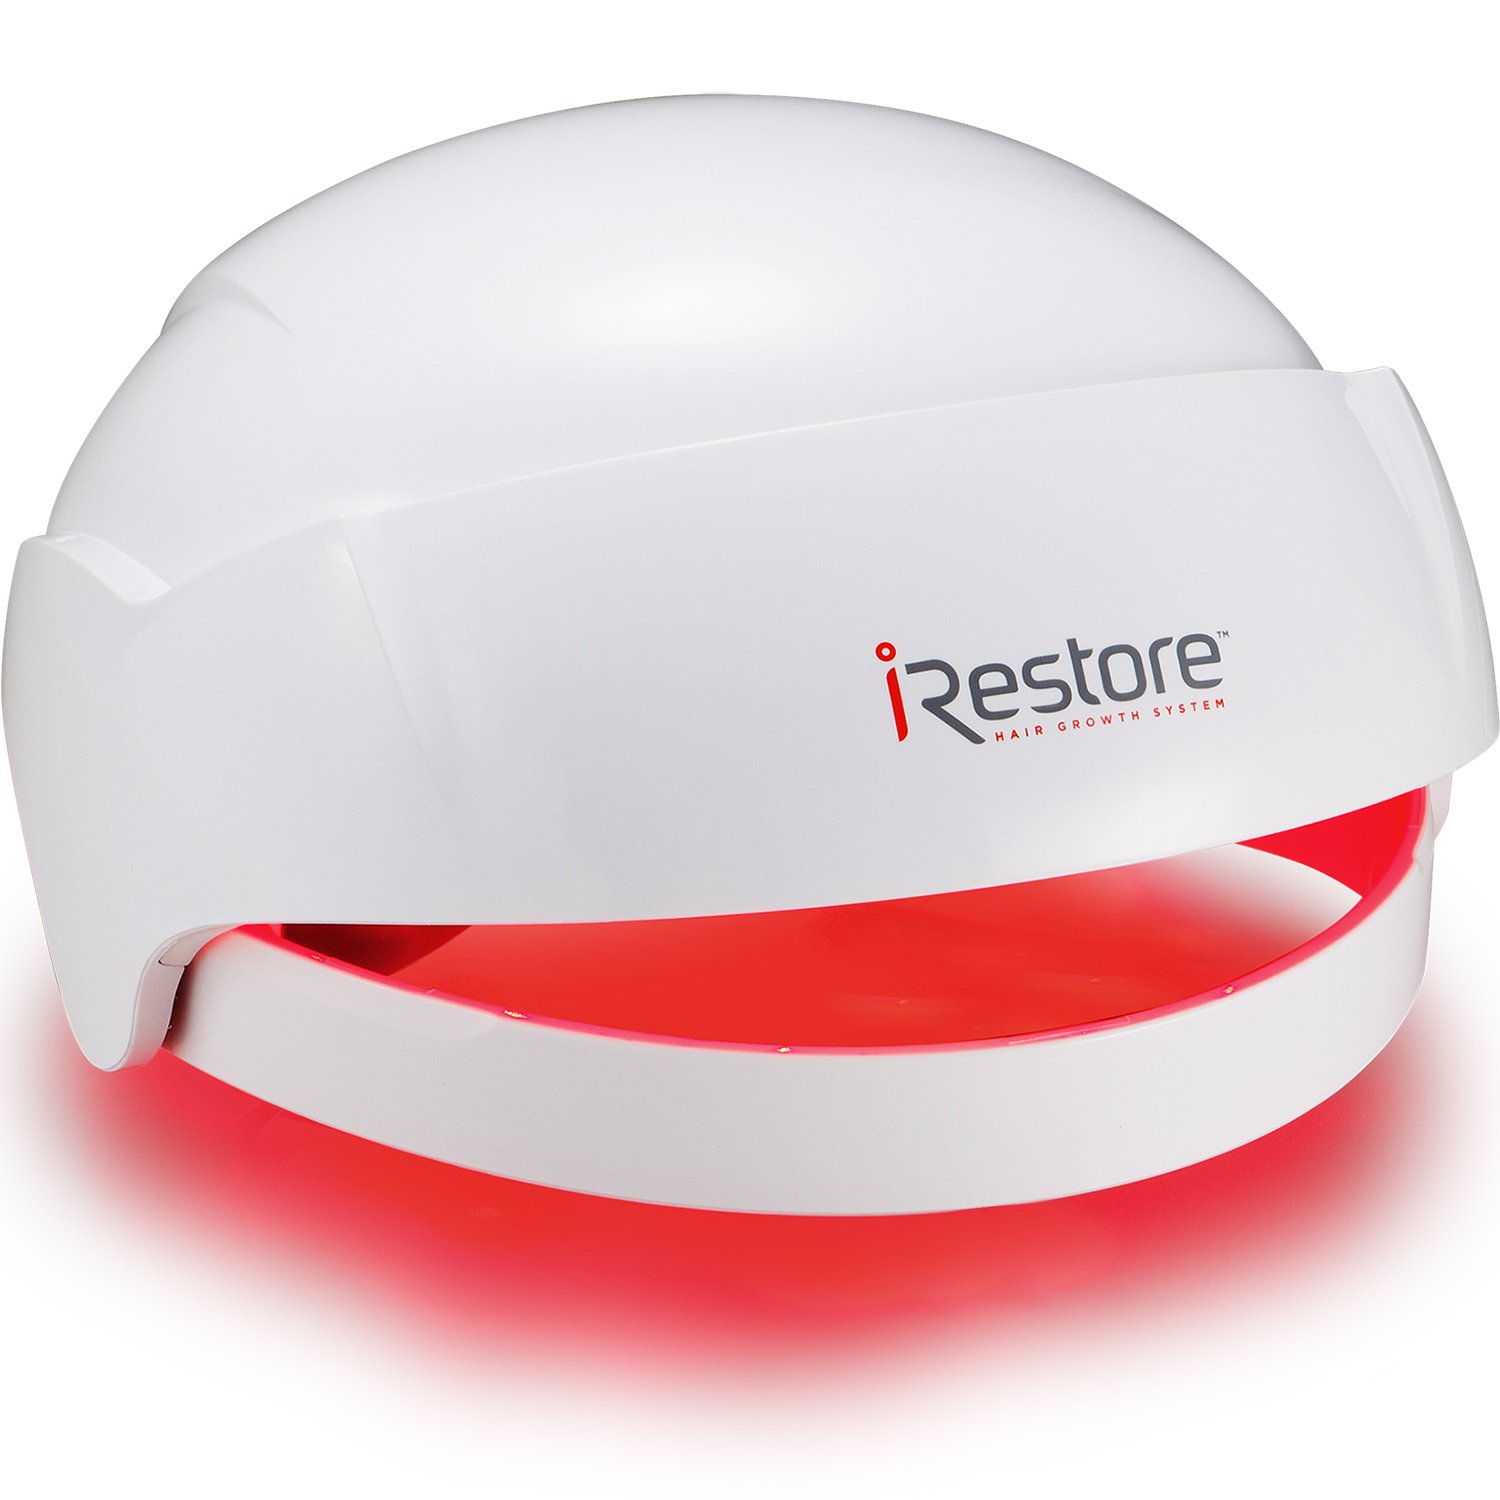 iRestore Laser Hair Growth System – FDA-Cleared Hair Loss